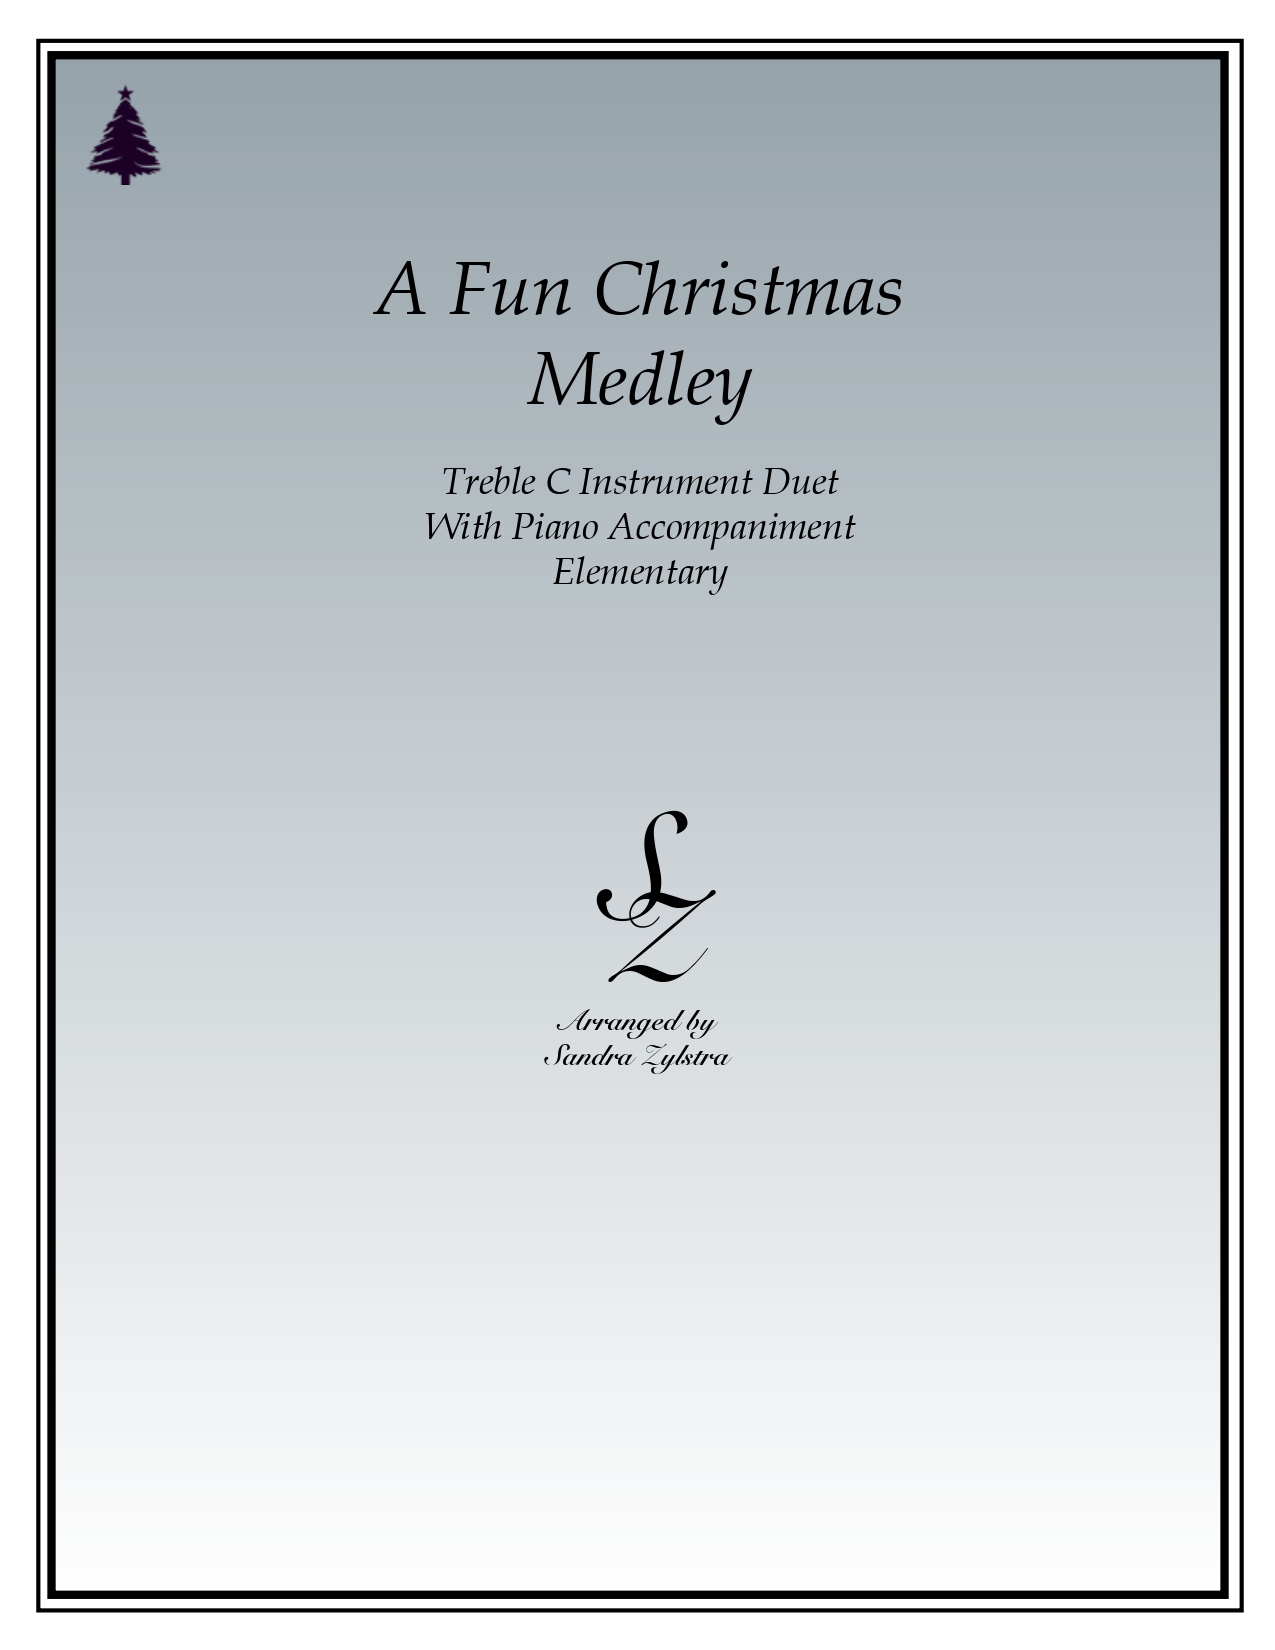 A Fun Christmas Medley treble C instrument duet parts cover page 00011